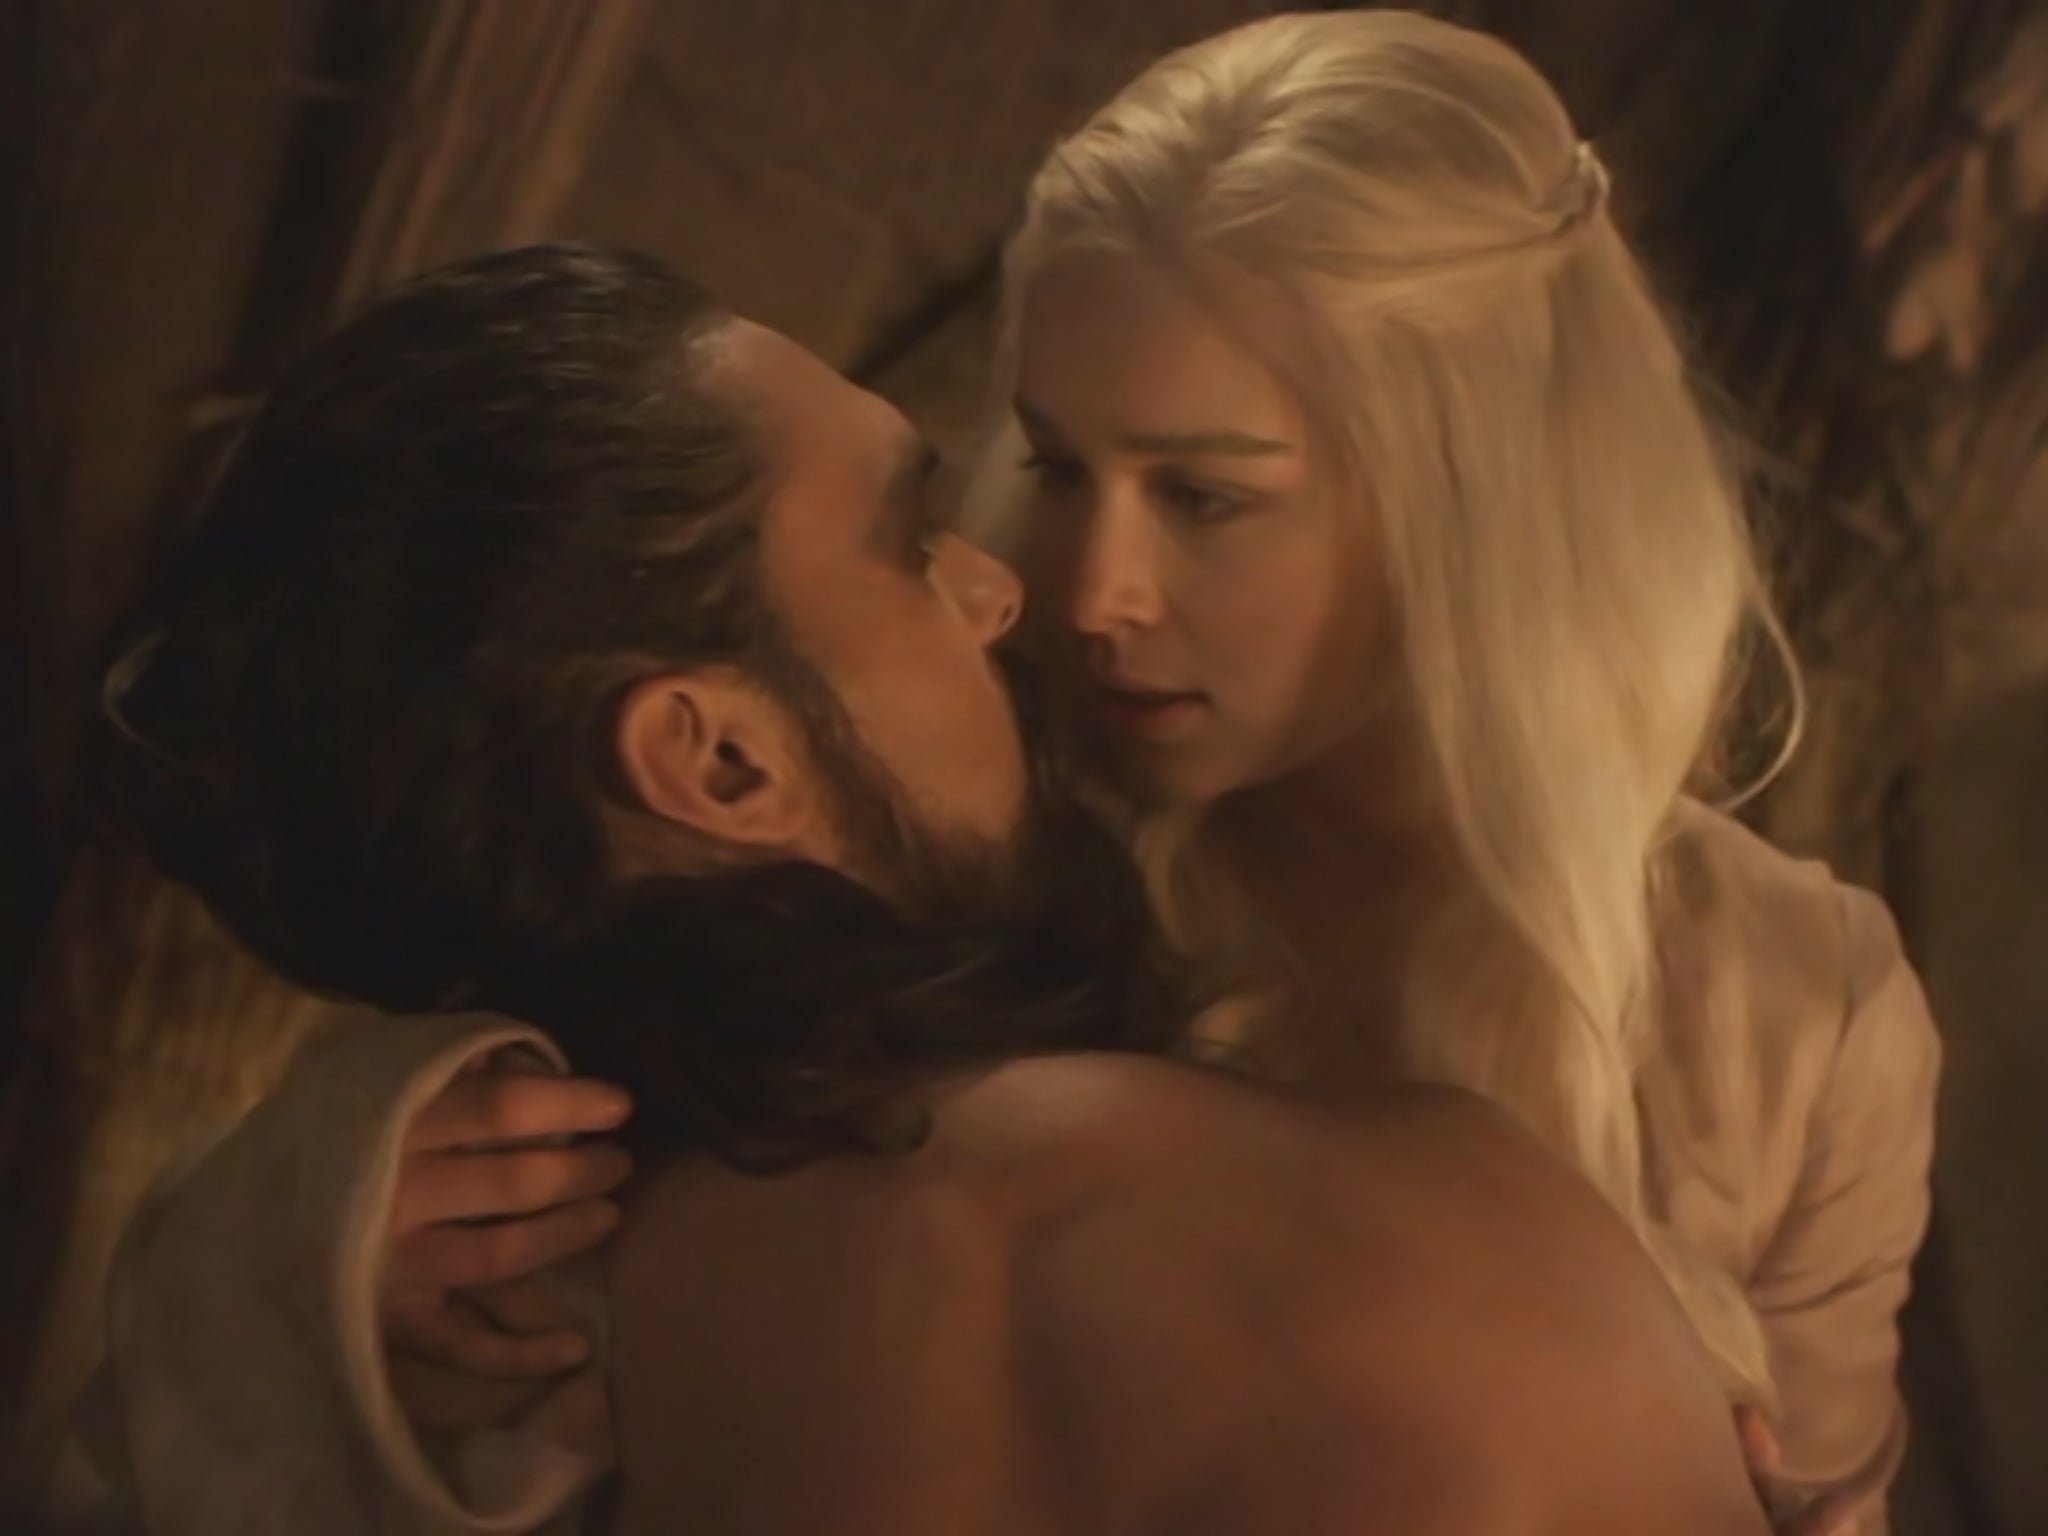 Game of thrones daenerys and khal drogo sex scene song